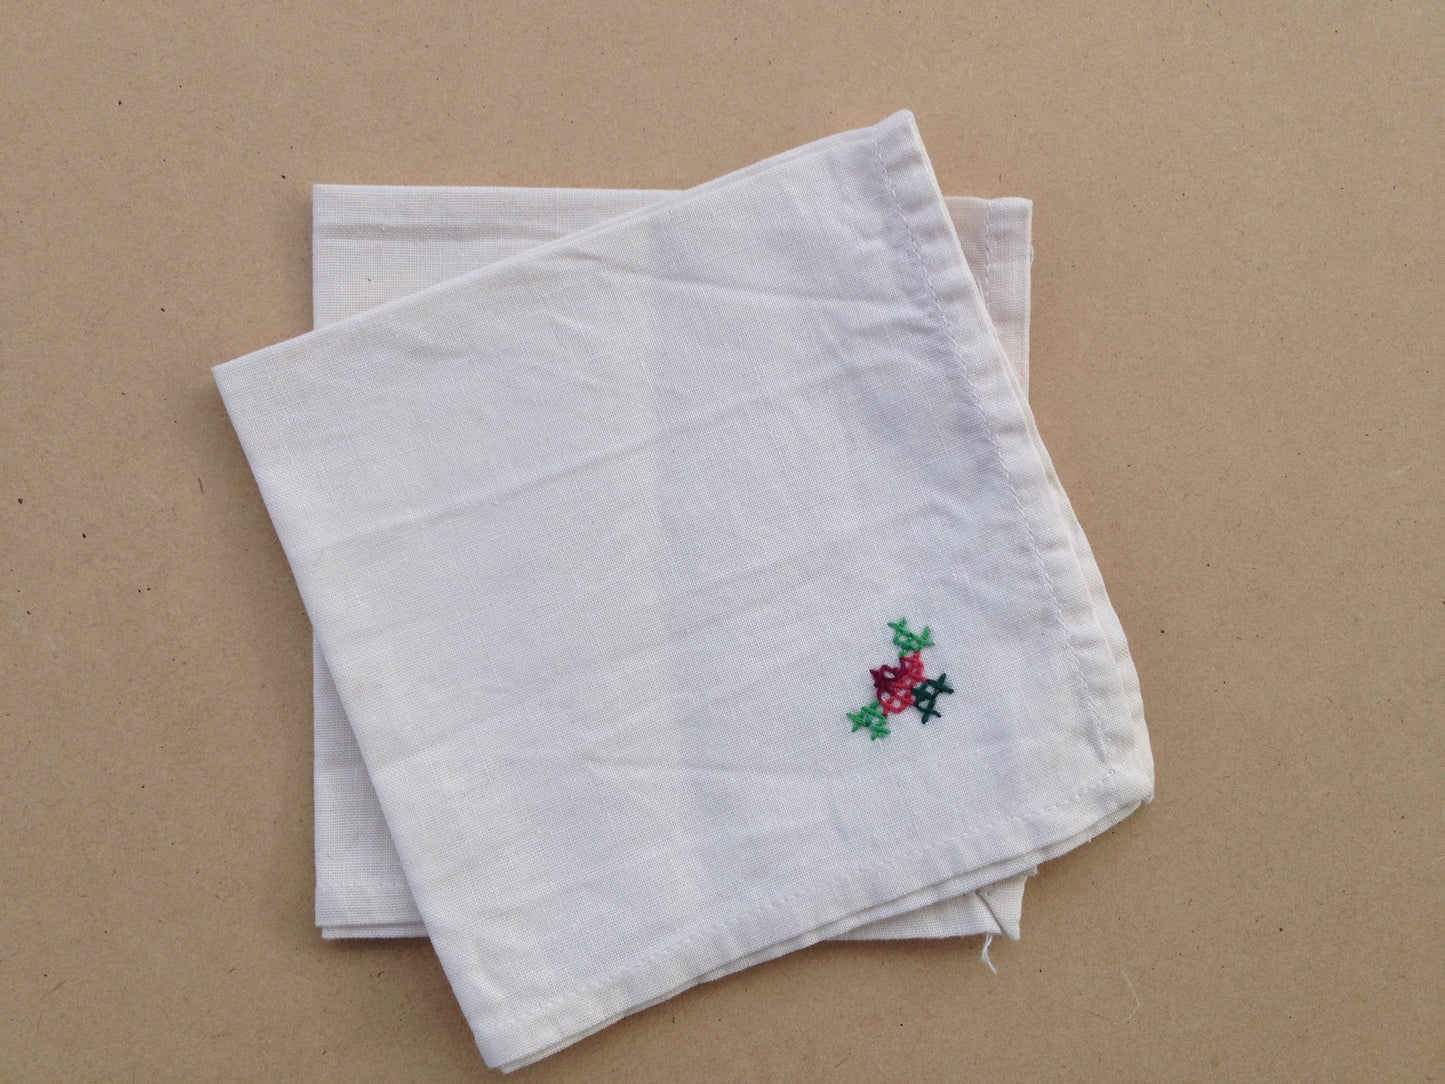 Vintage White Linen Napkins with Embroided Rose